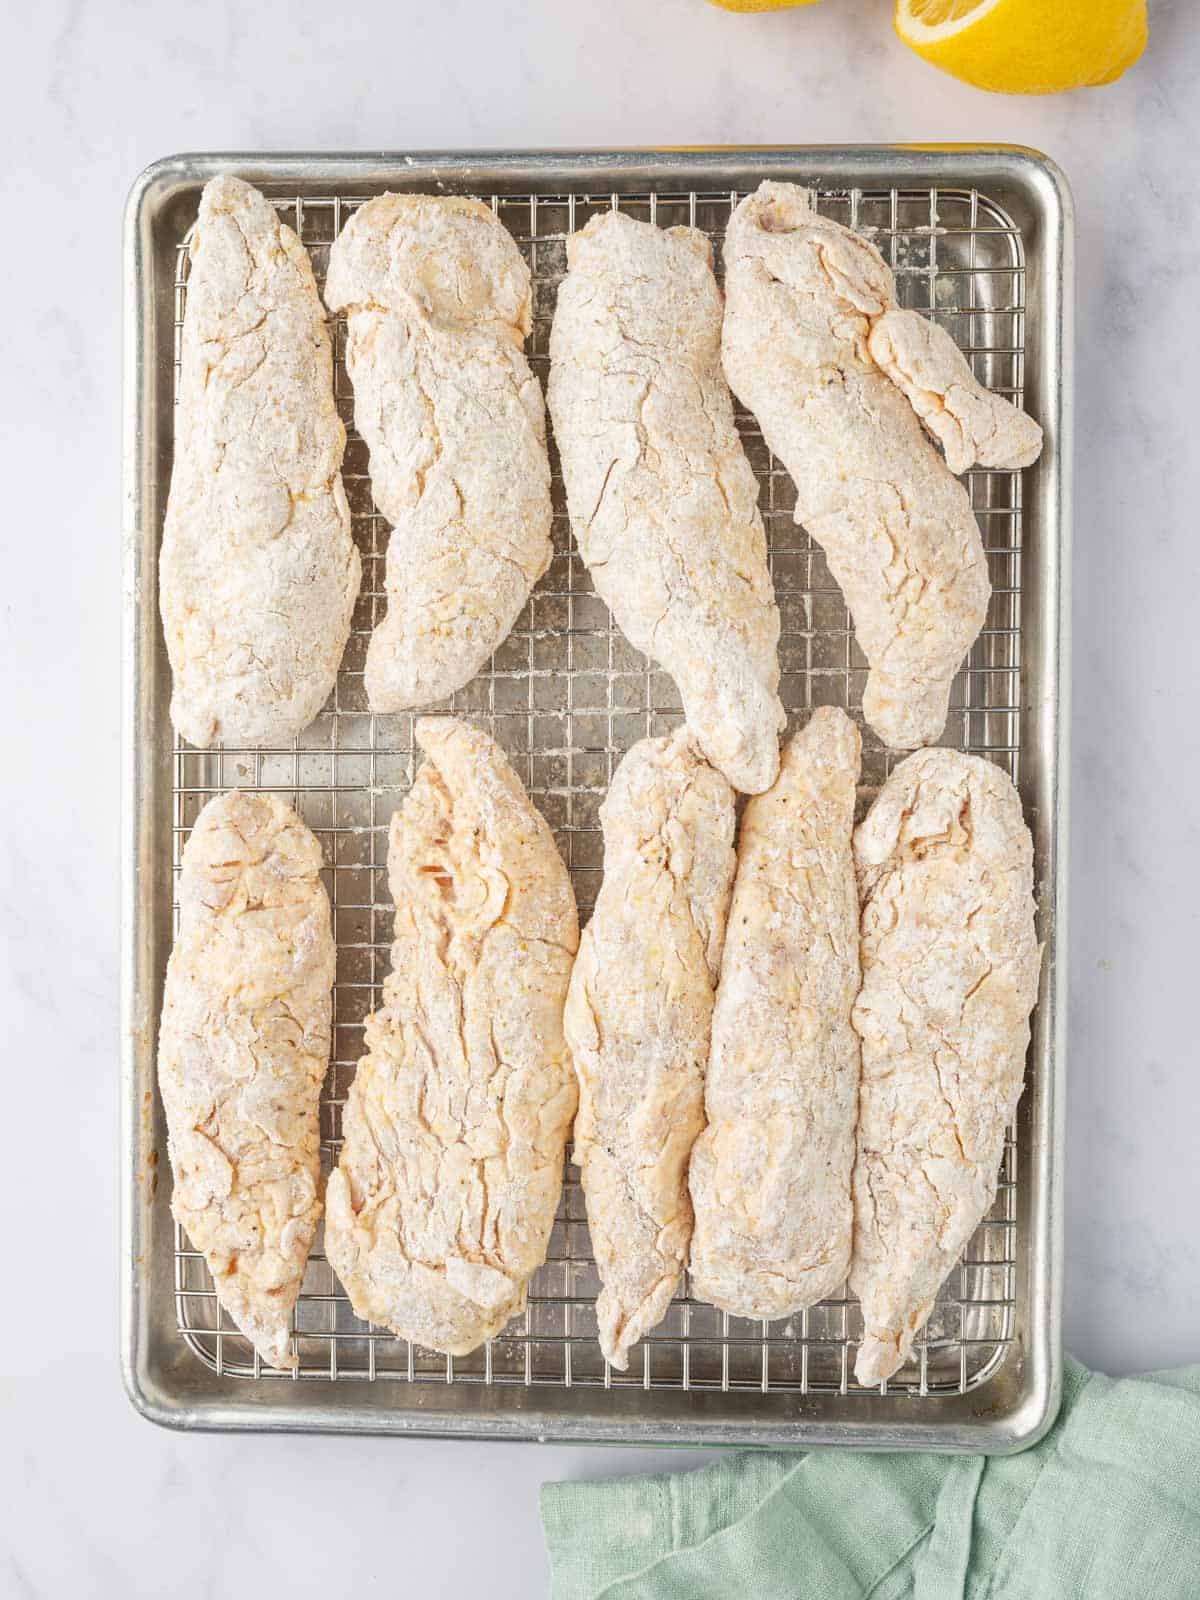 Rest the breaded chicken fingers on a baking rack.